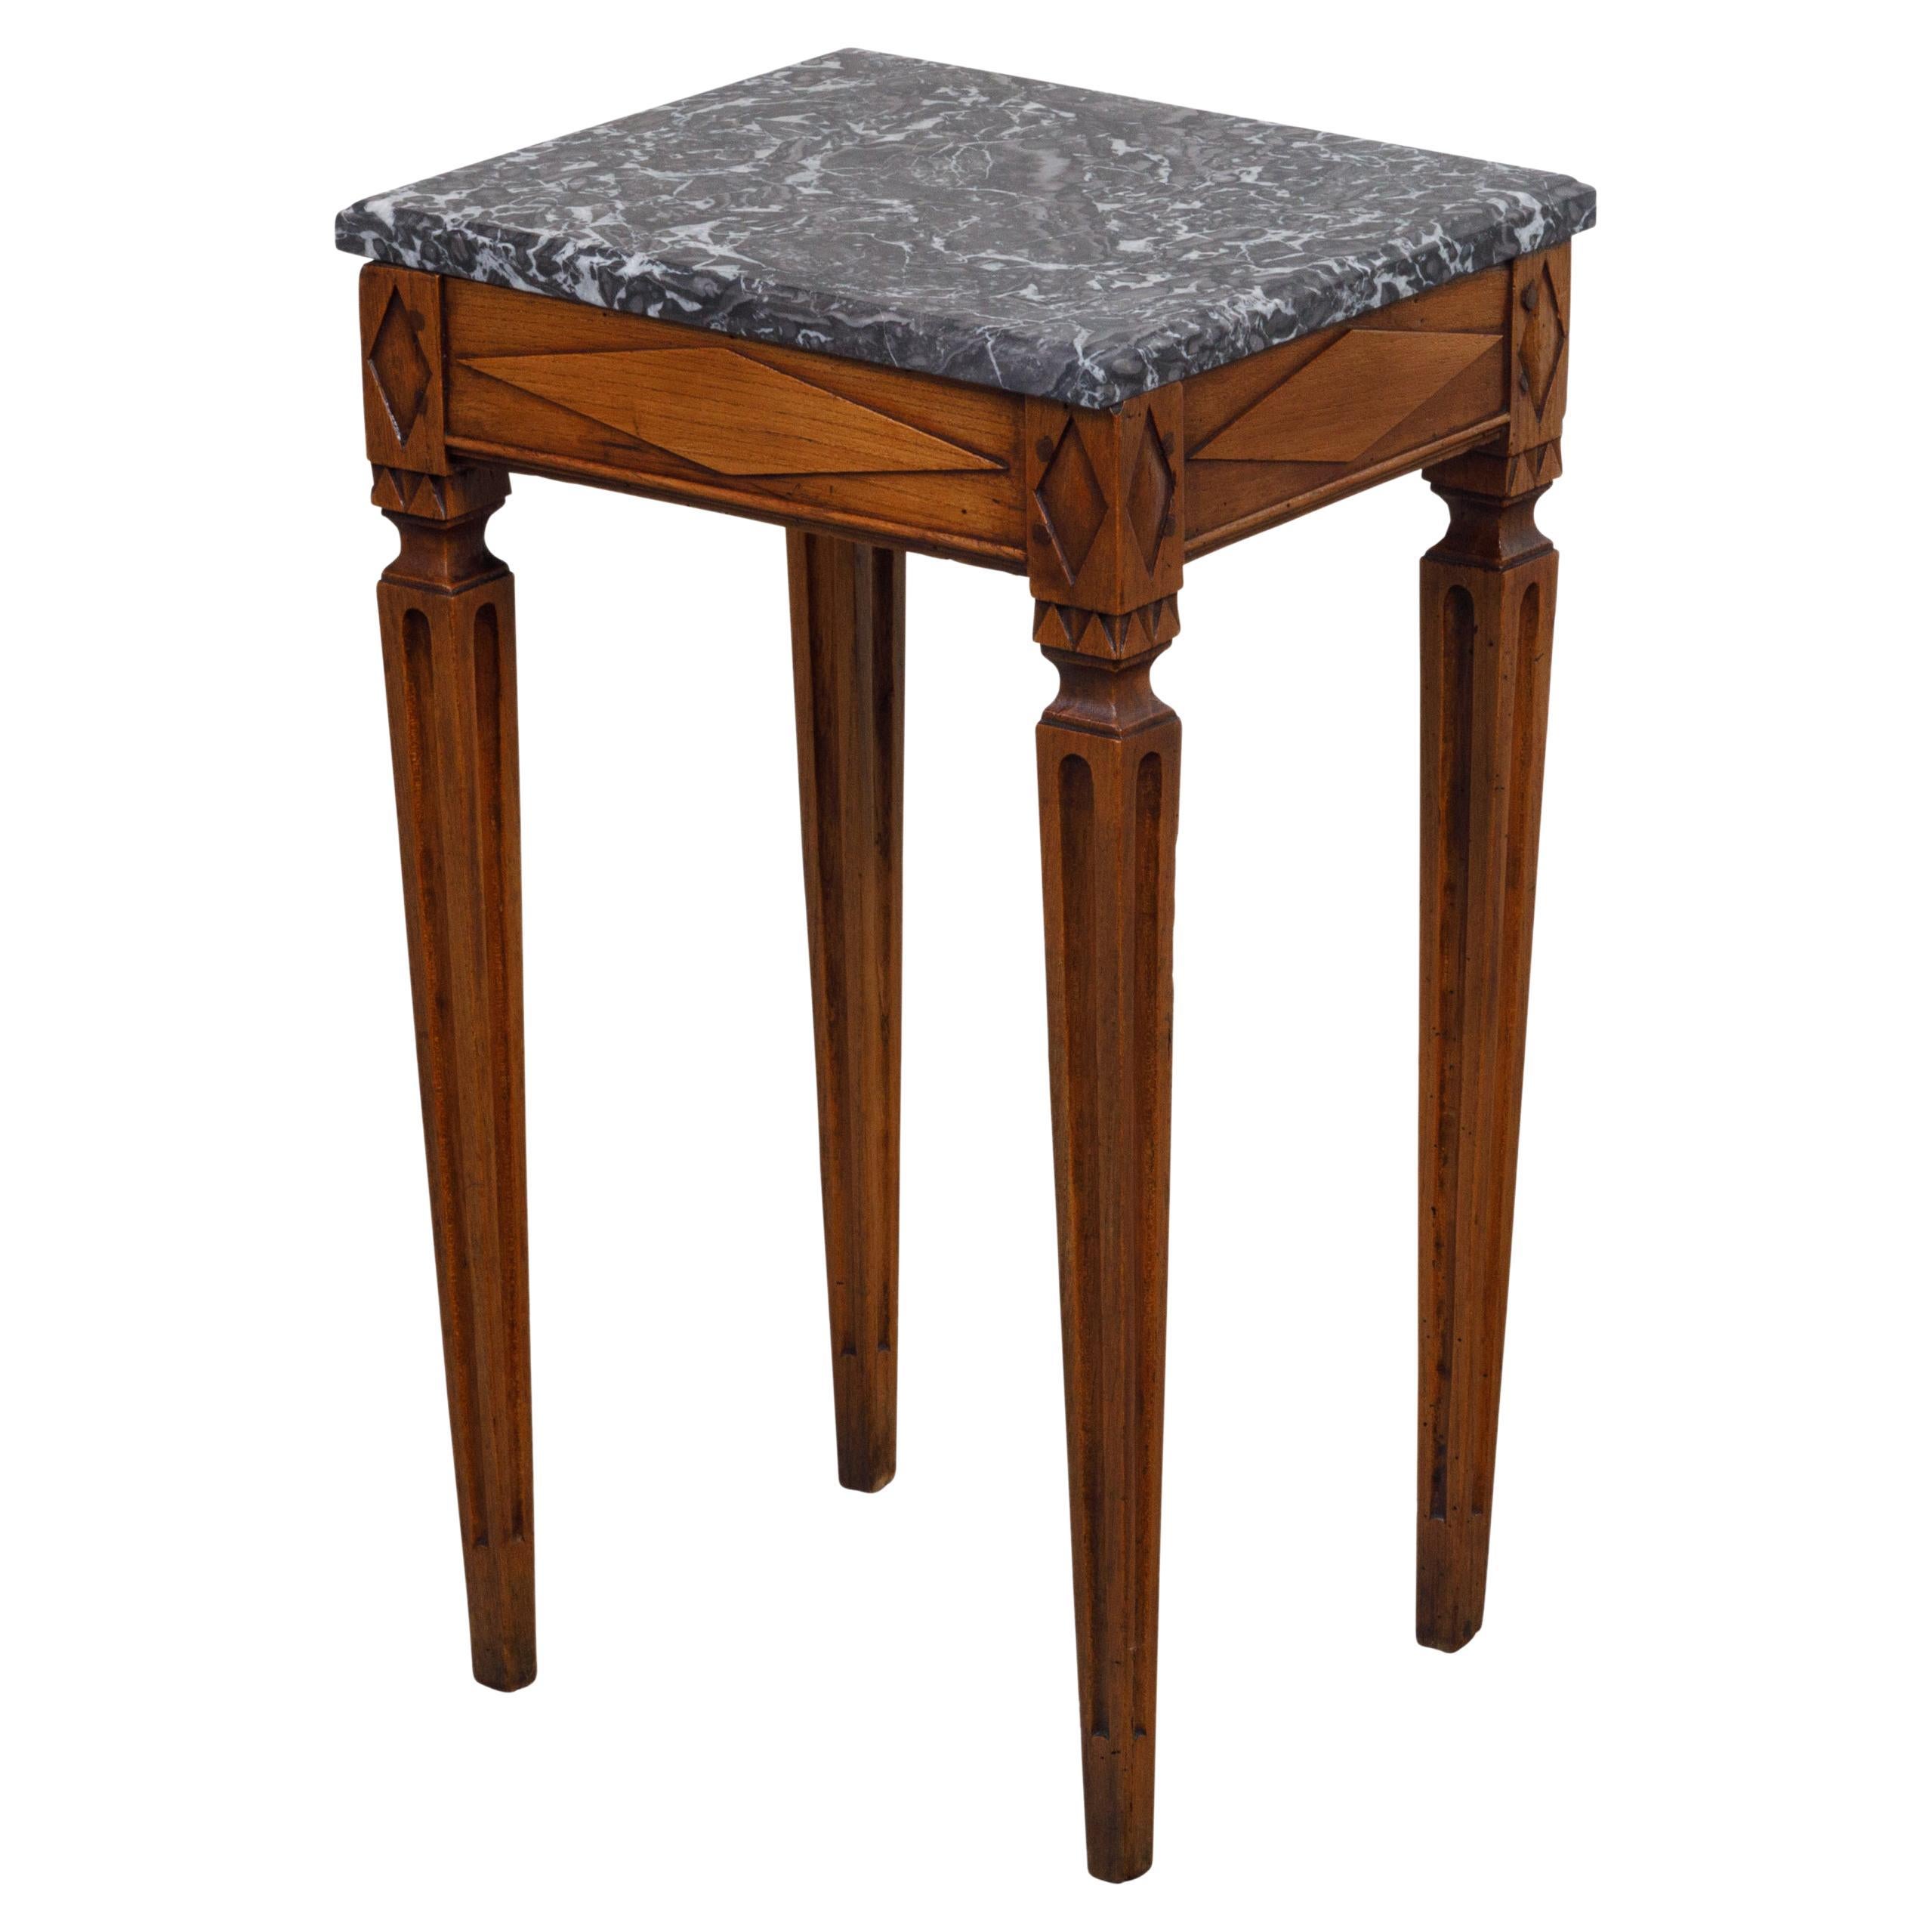 French Neoclassical Style 19th Century Wooden Table with Grey Veined Marble Top For Sale